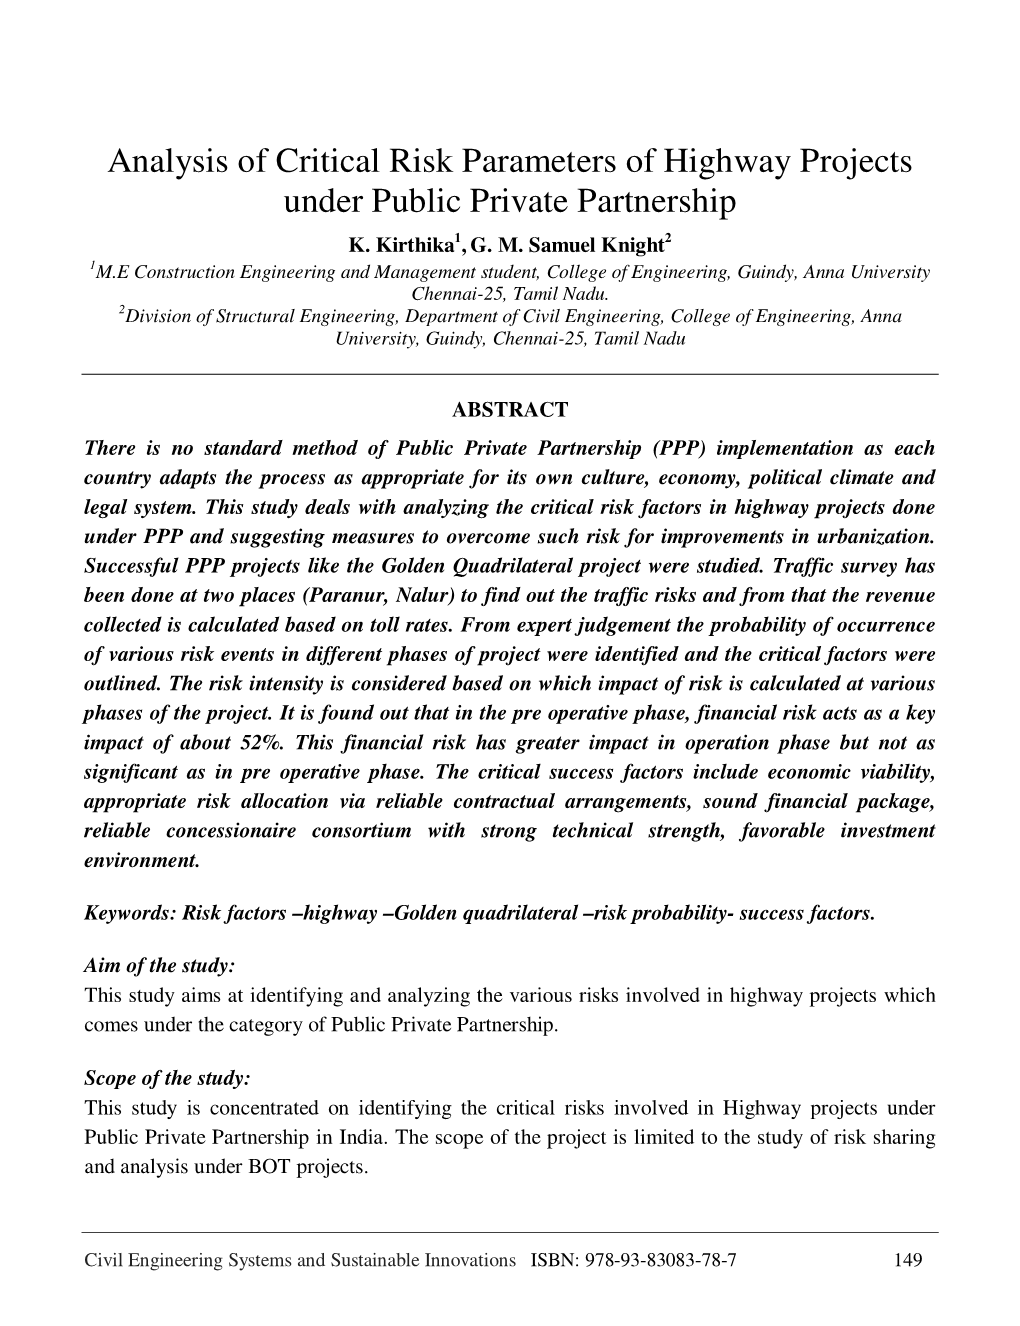 Analysis of Critical Risk Parameters of Highway Projects Under Public Private Partnership 1 2 K